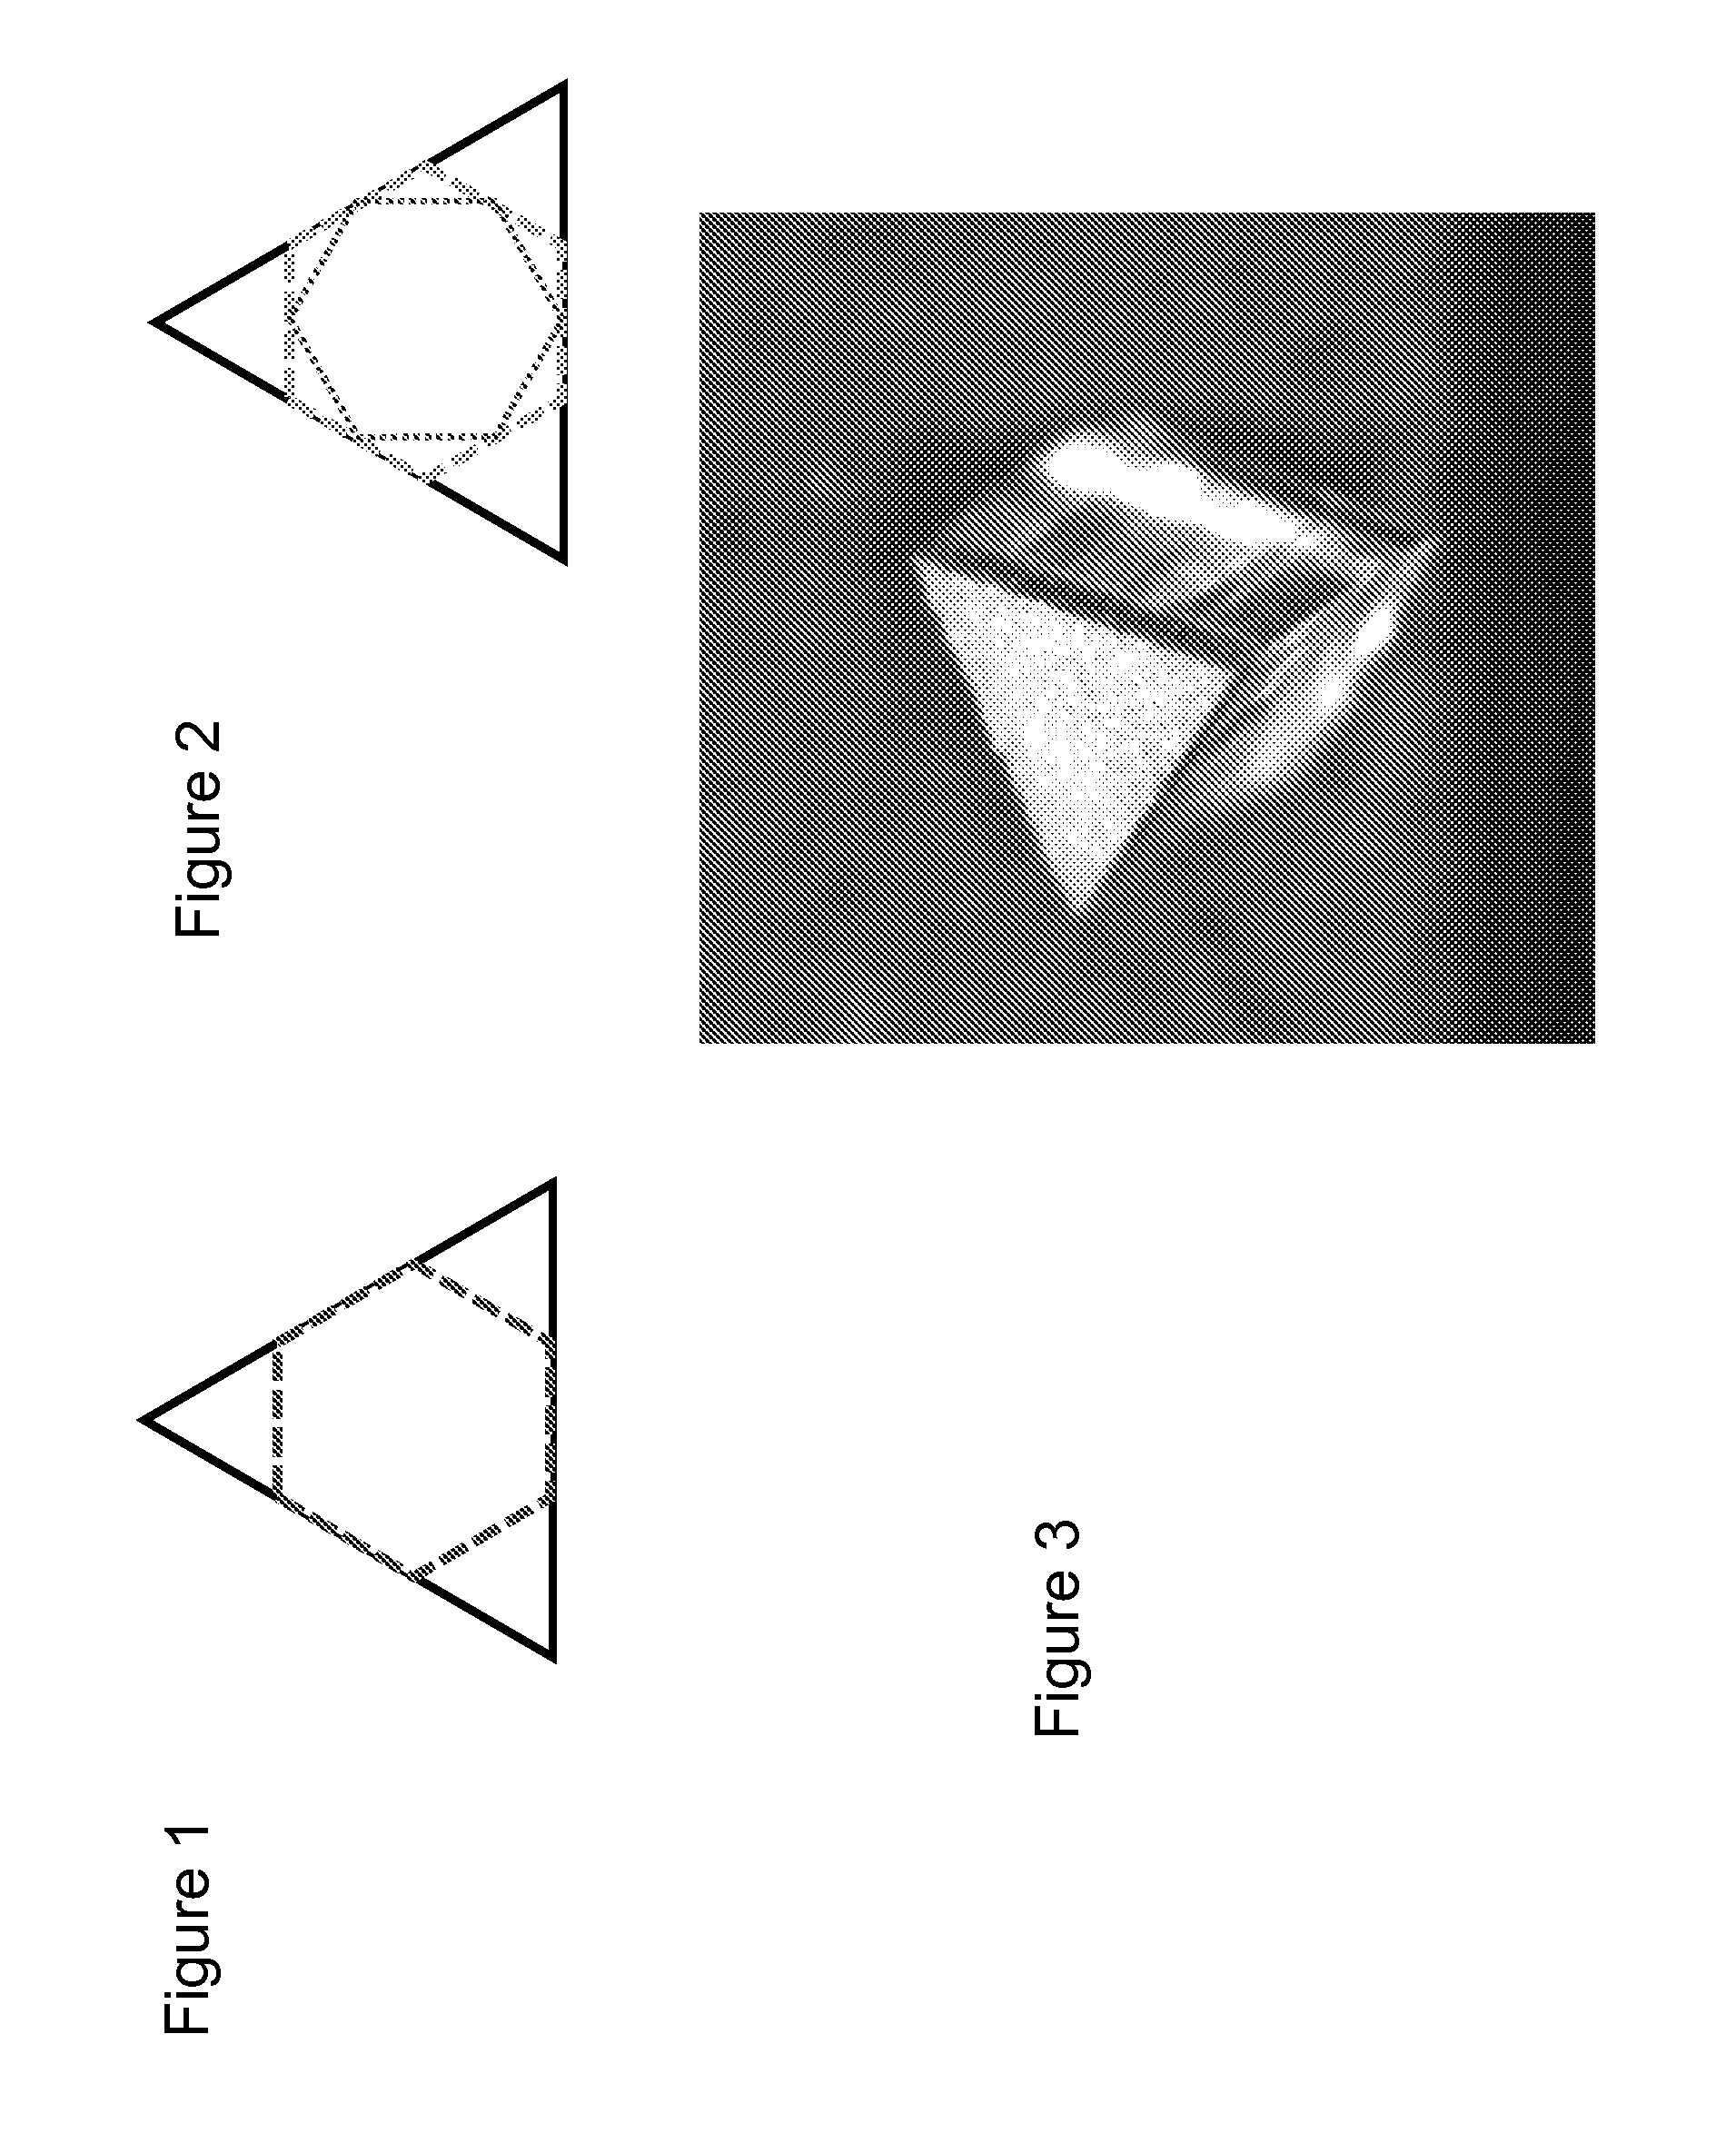 Gallium and nitrogen containing triangular or diamond-shaped configuration for optical devices